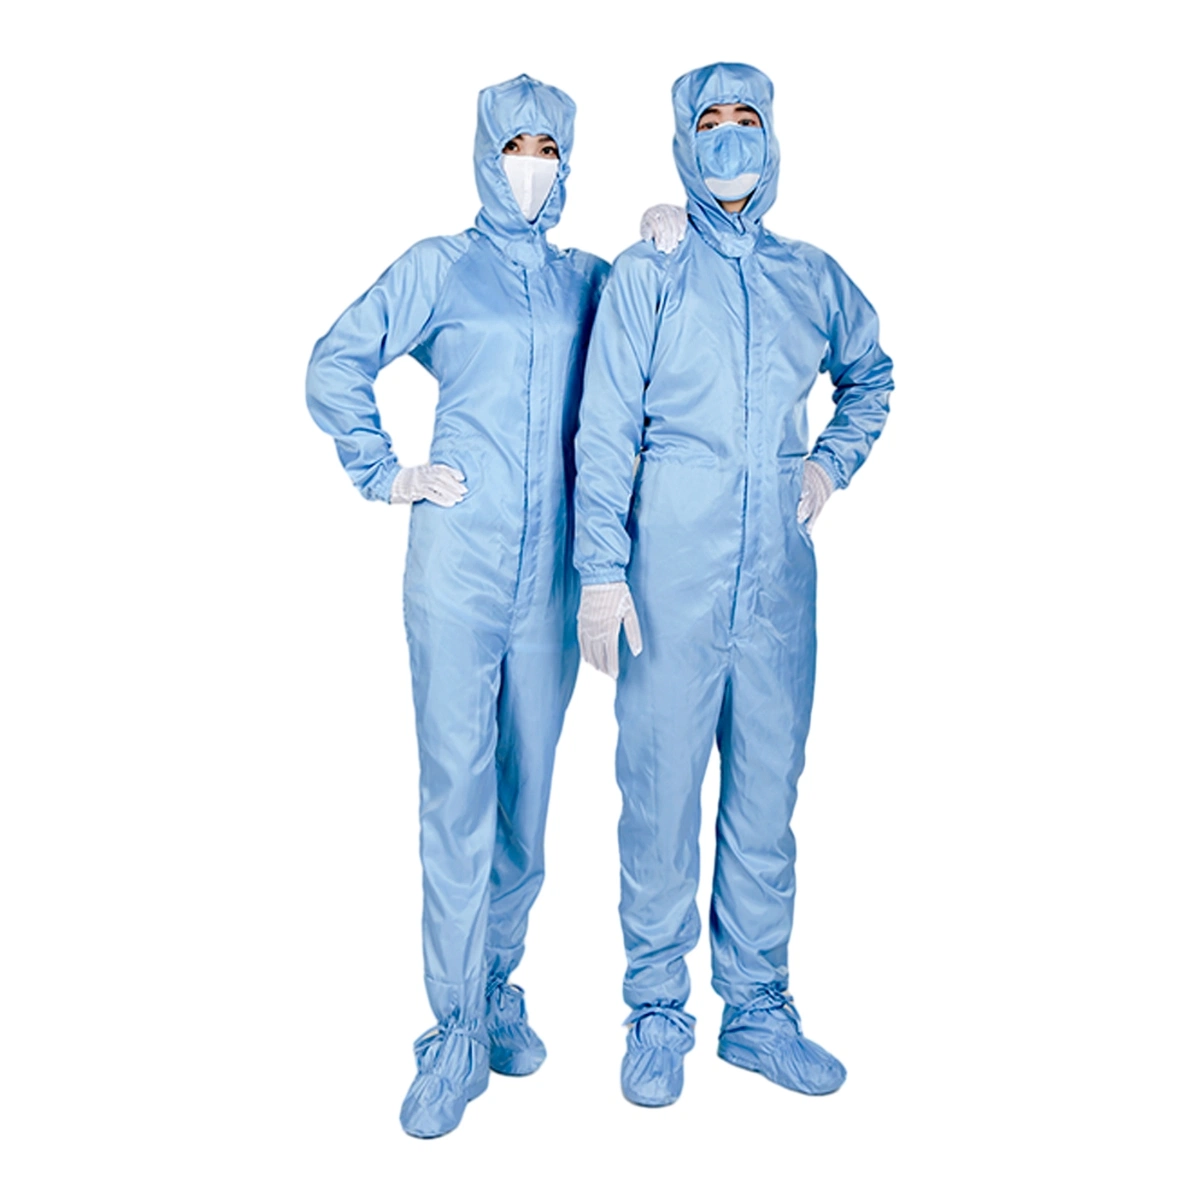 One-Piece Clean Cloth Anti-Static Clothing Garment for Cleanroom Workwear Suit Jumpsuit